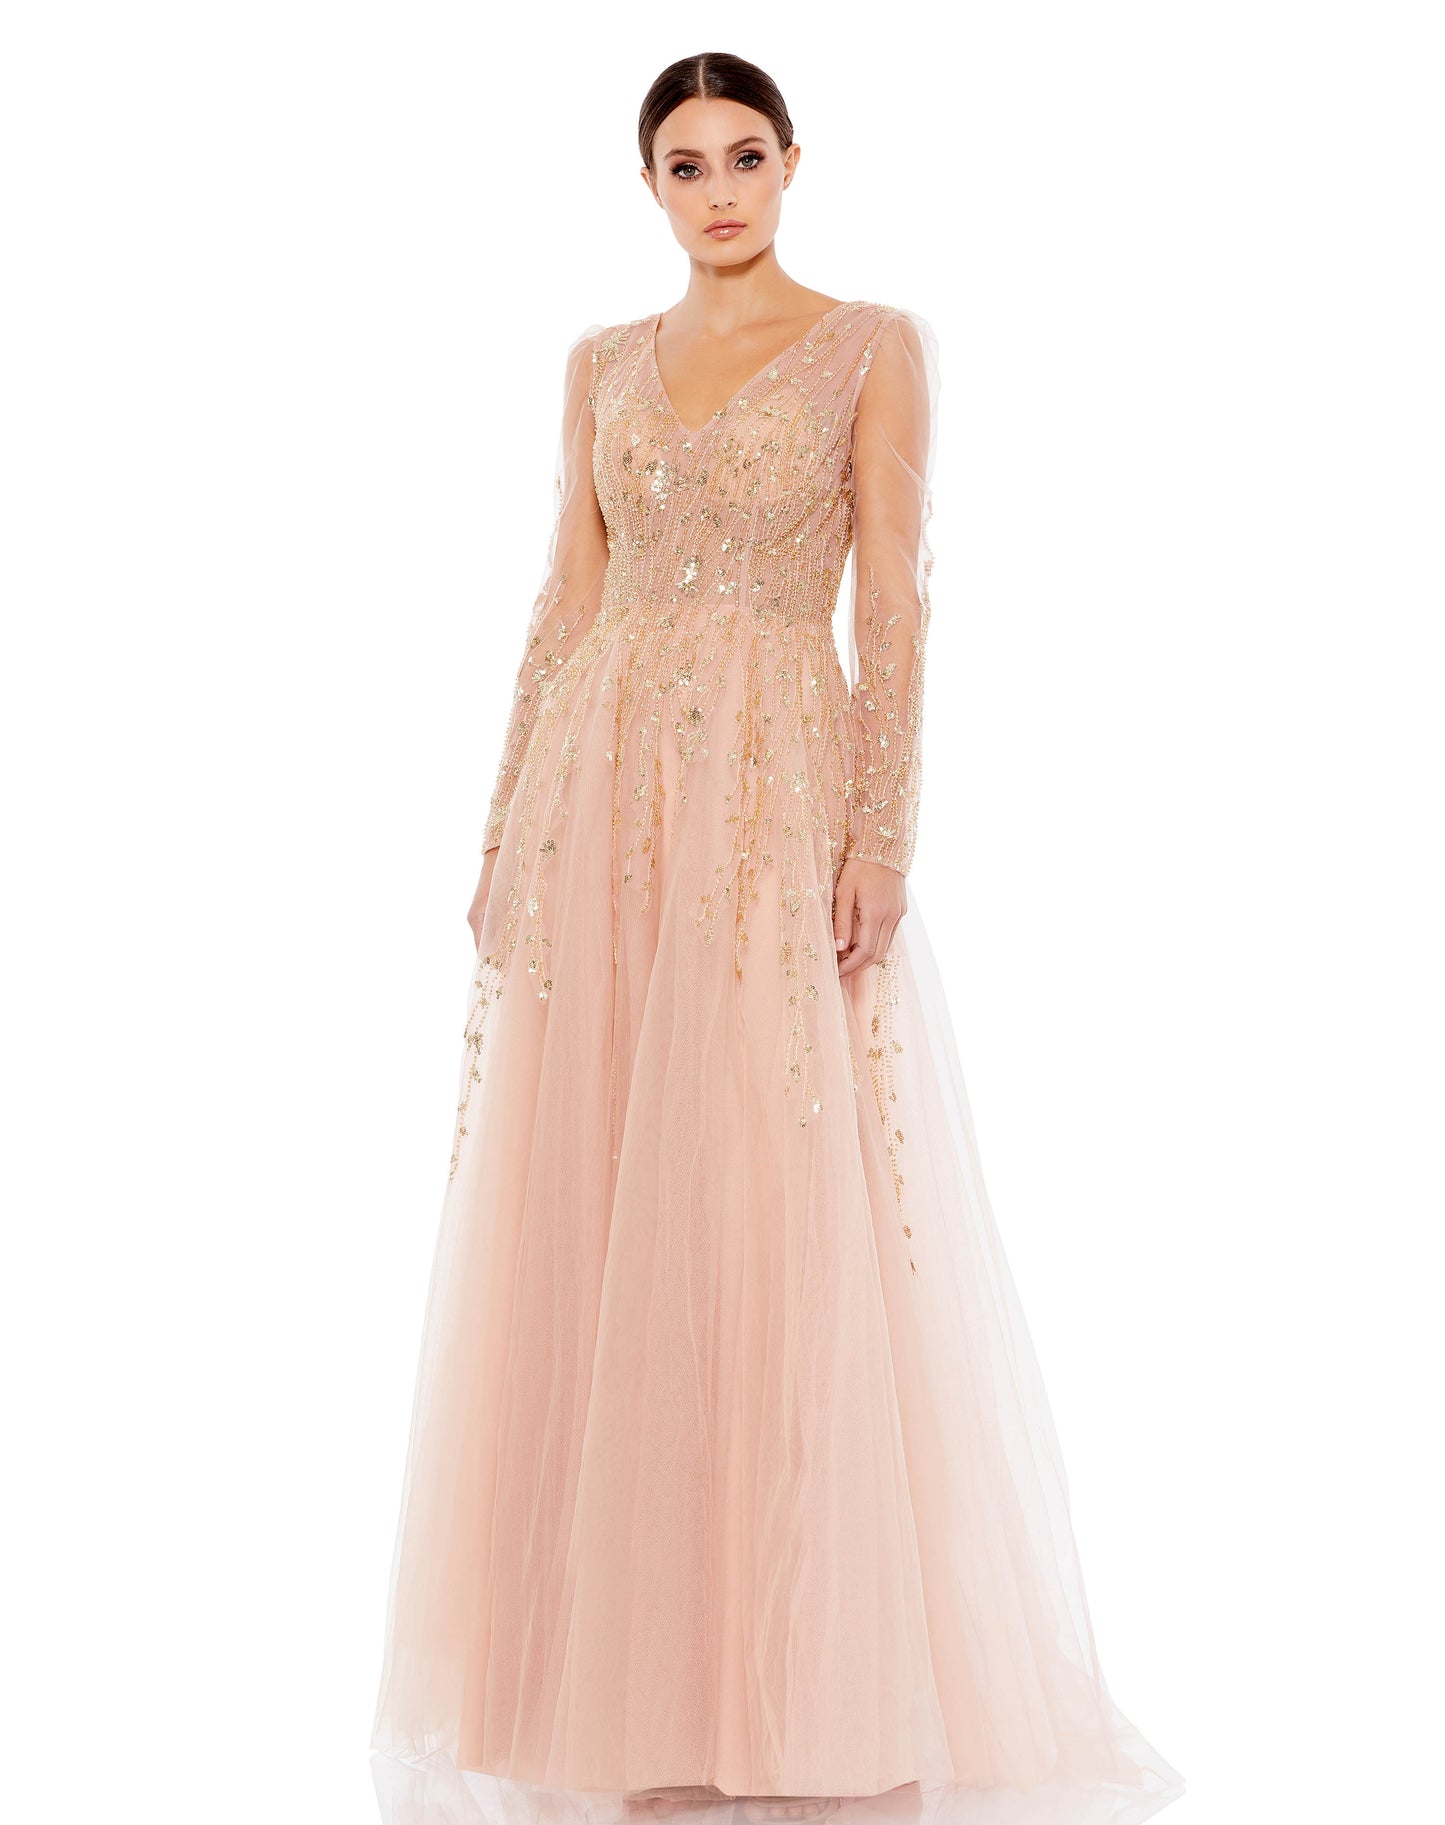 Elegant evening gown with a v-neckline, long illusion sleeves with slightly puffed shoulders, and a floor-length skirt with a sweeping train. This gown has gorgeous vertical beading and sequin details across the bodice and sleeves. Mac Duggal Partially Li